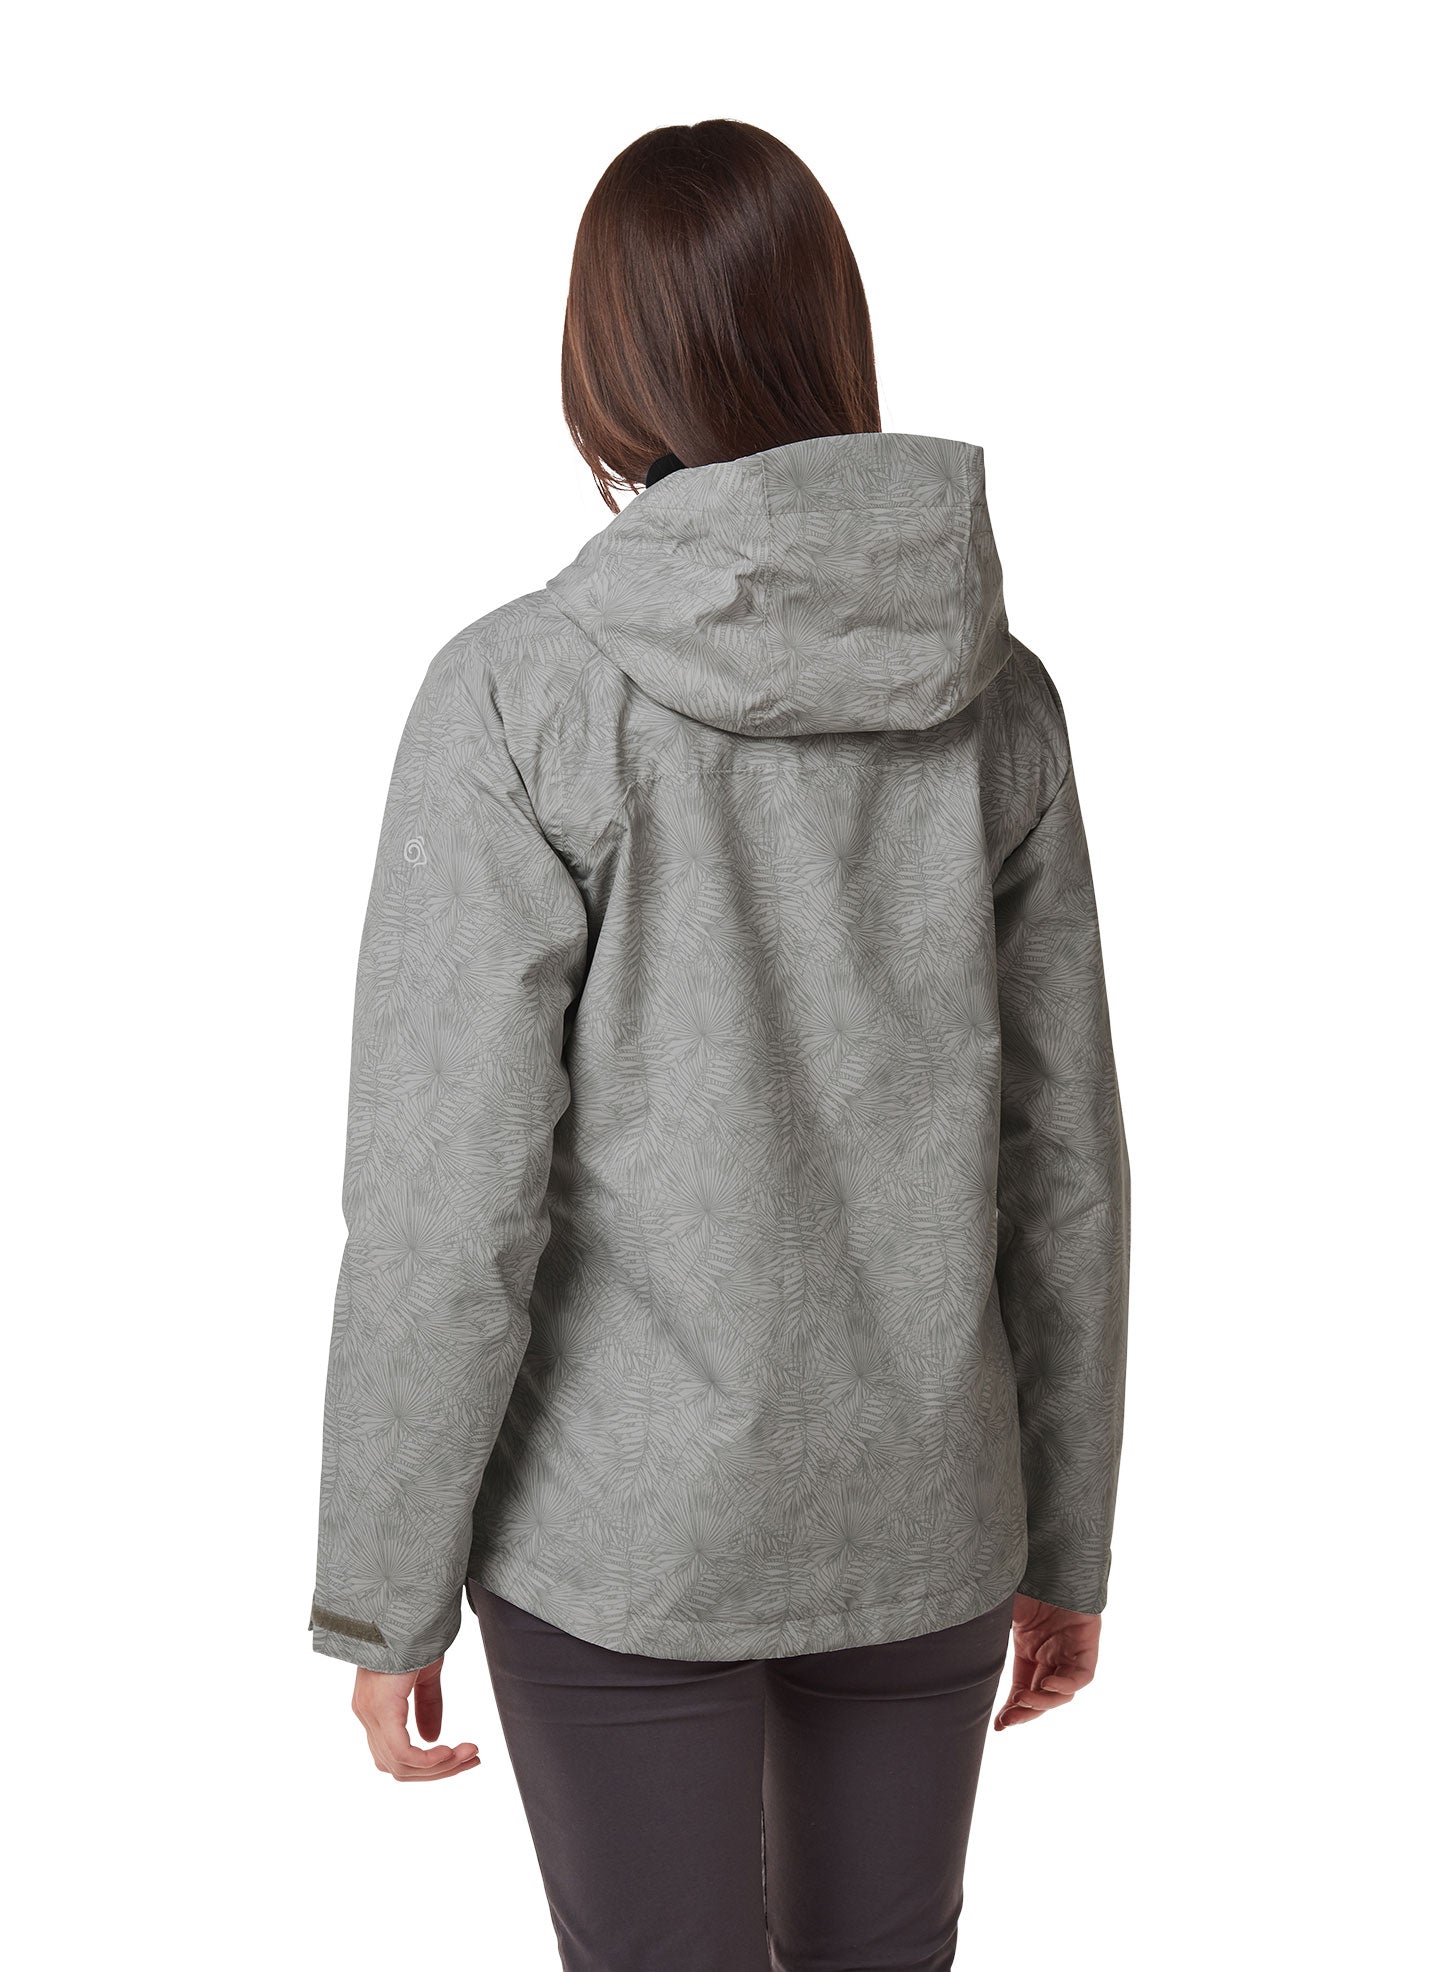 Back View grey Toscana Ladies Jacket by Craghoppers